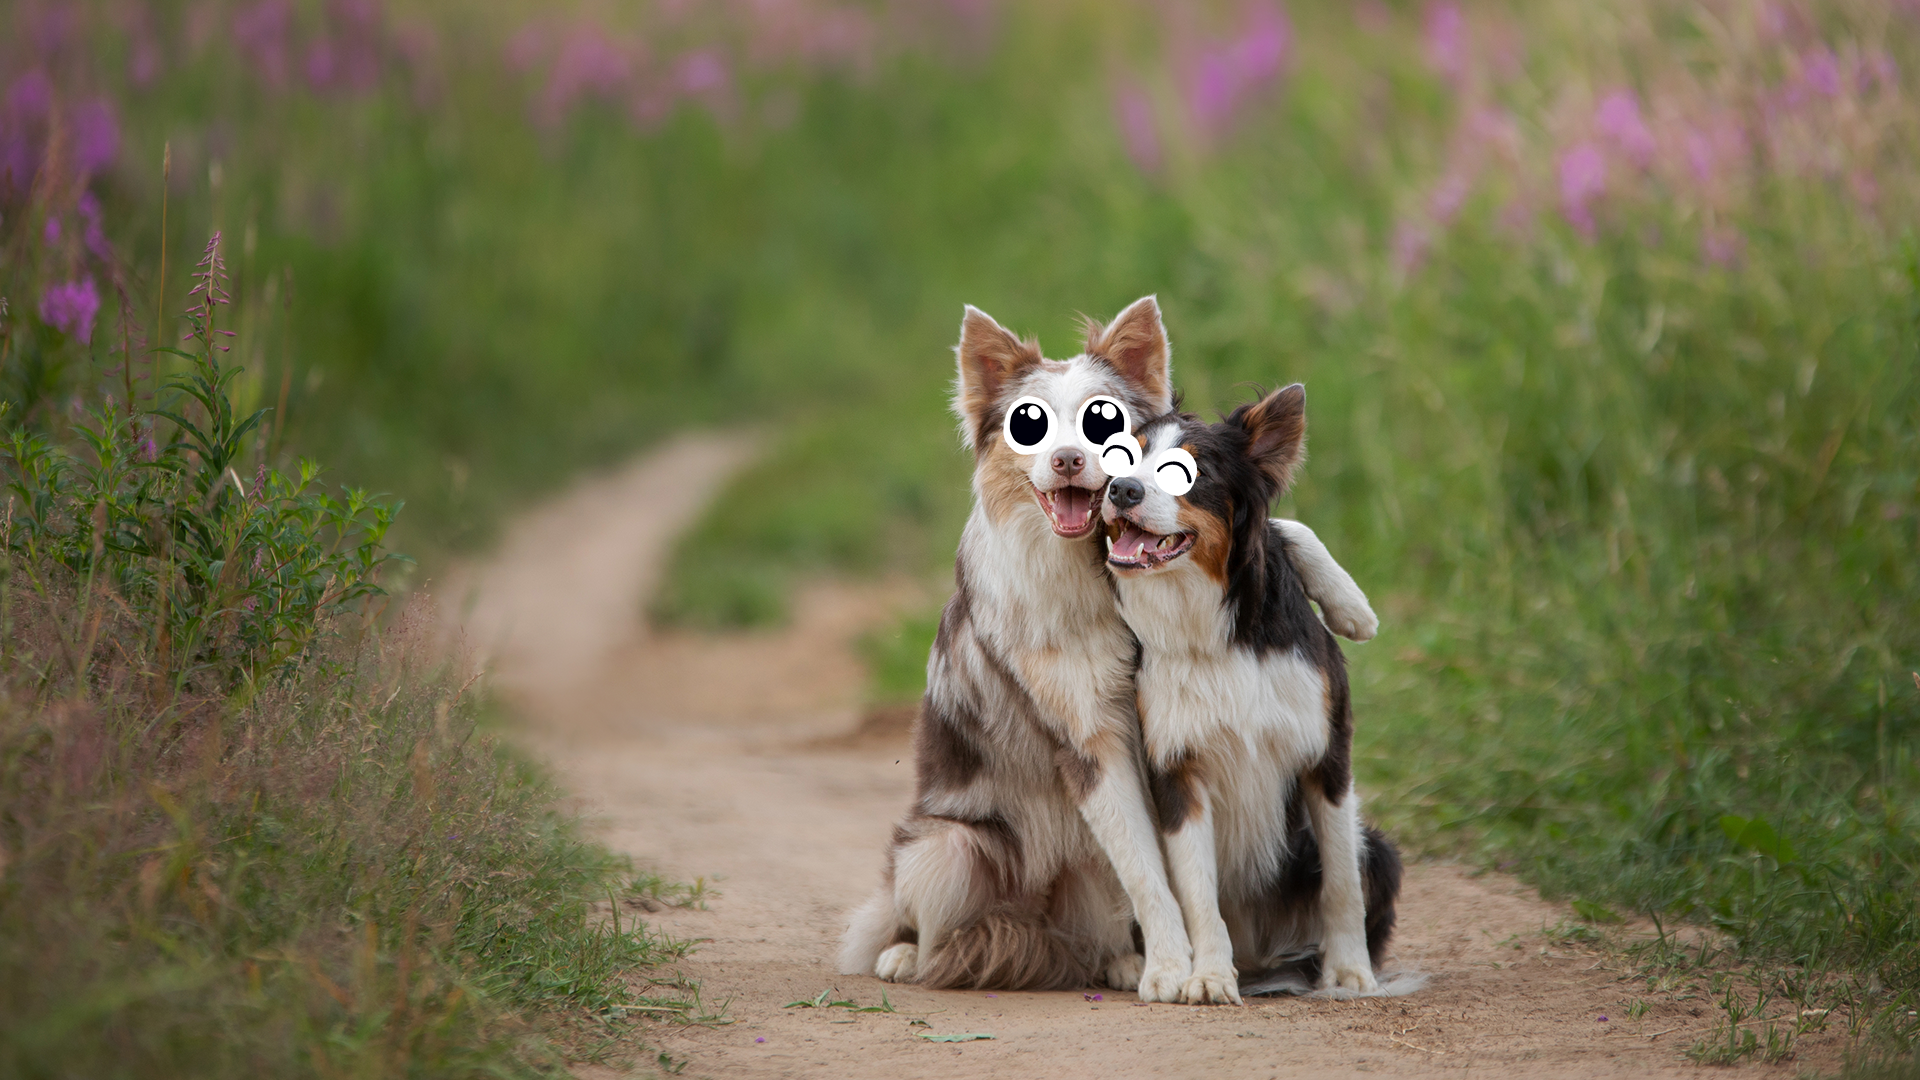 Two dogs taking a break in a country lane